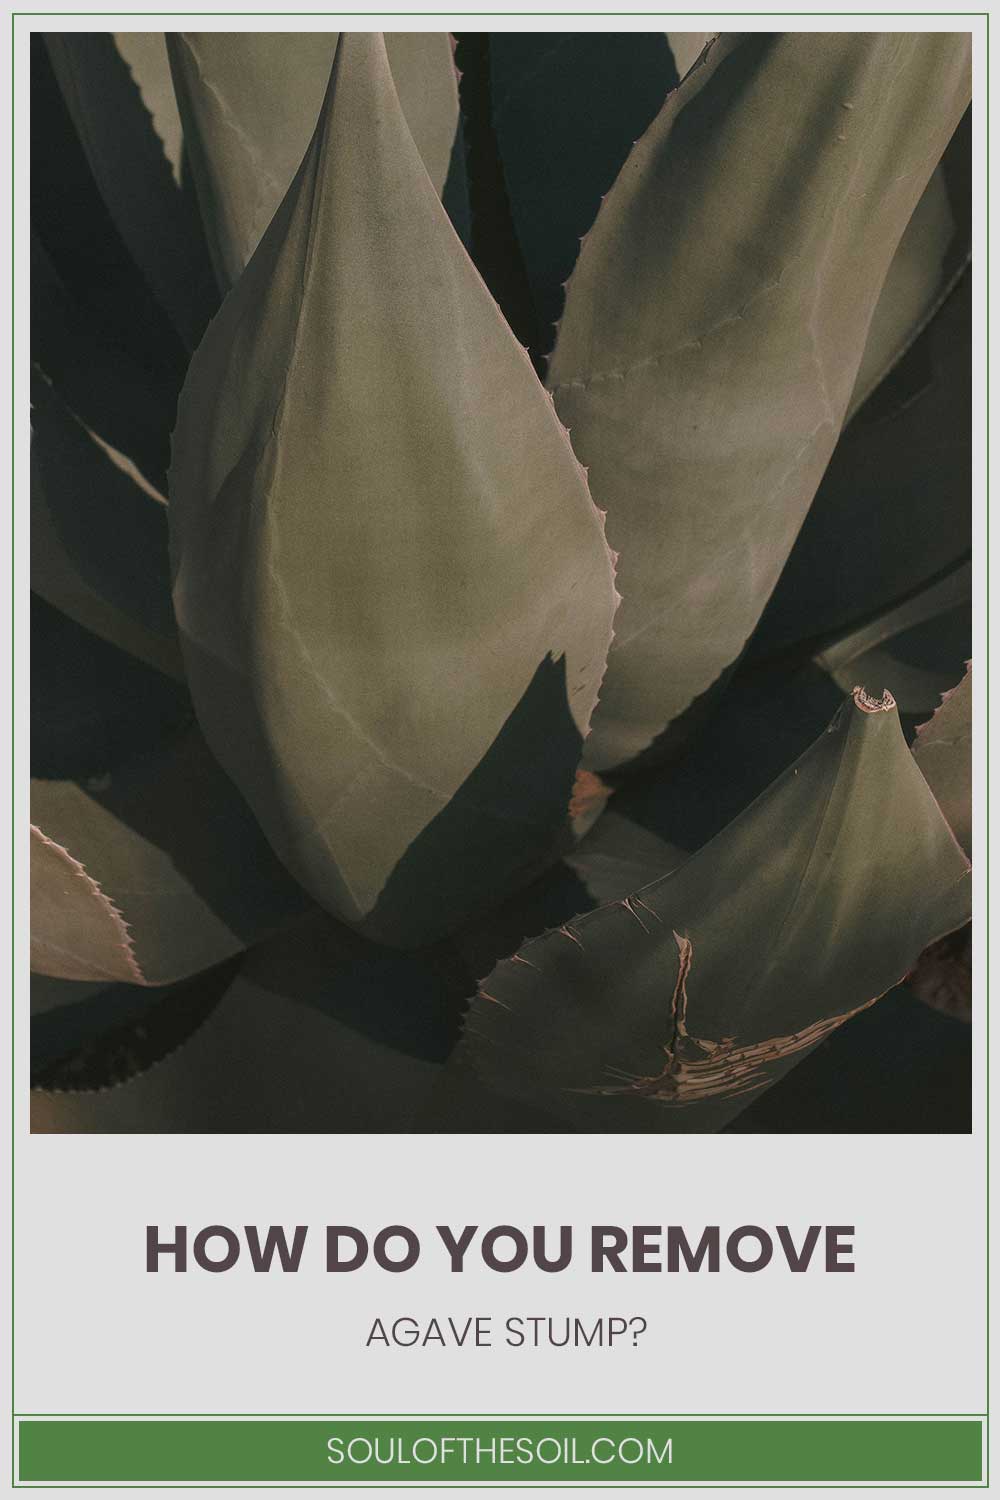 Agave - How Do You Remove the Stump?